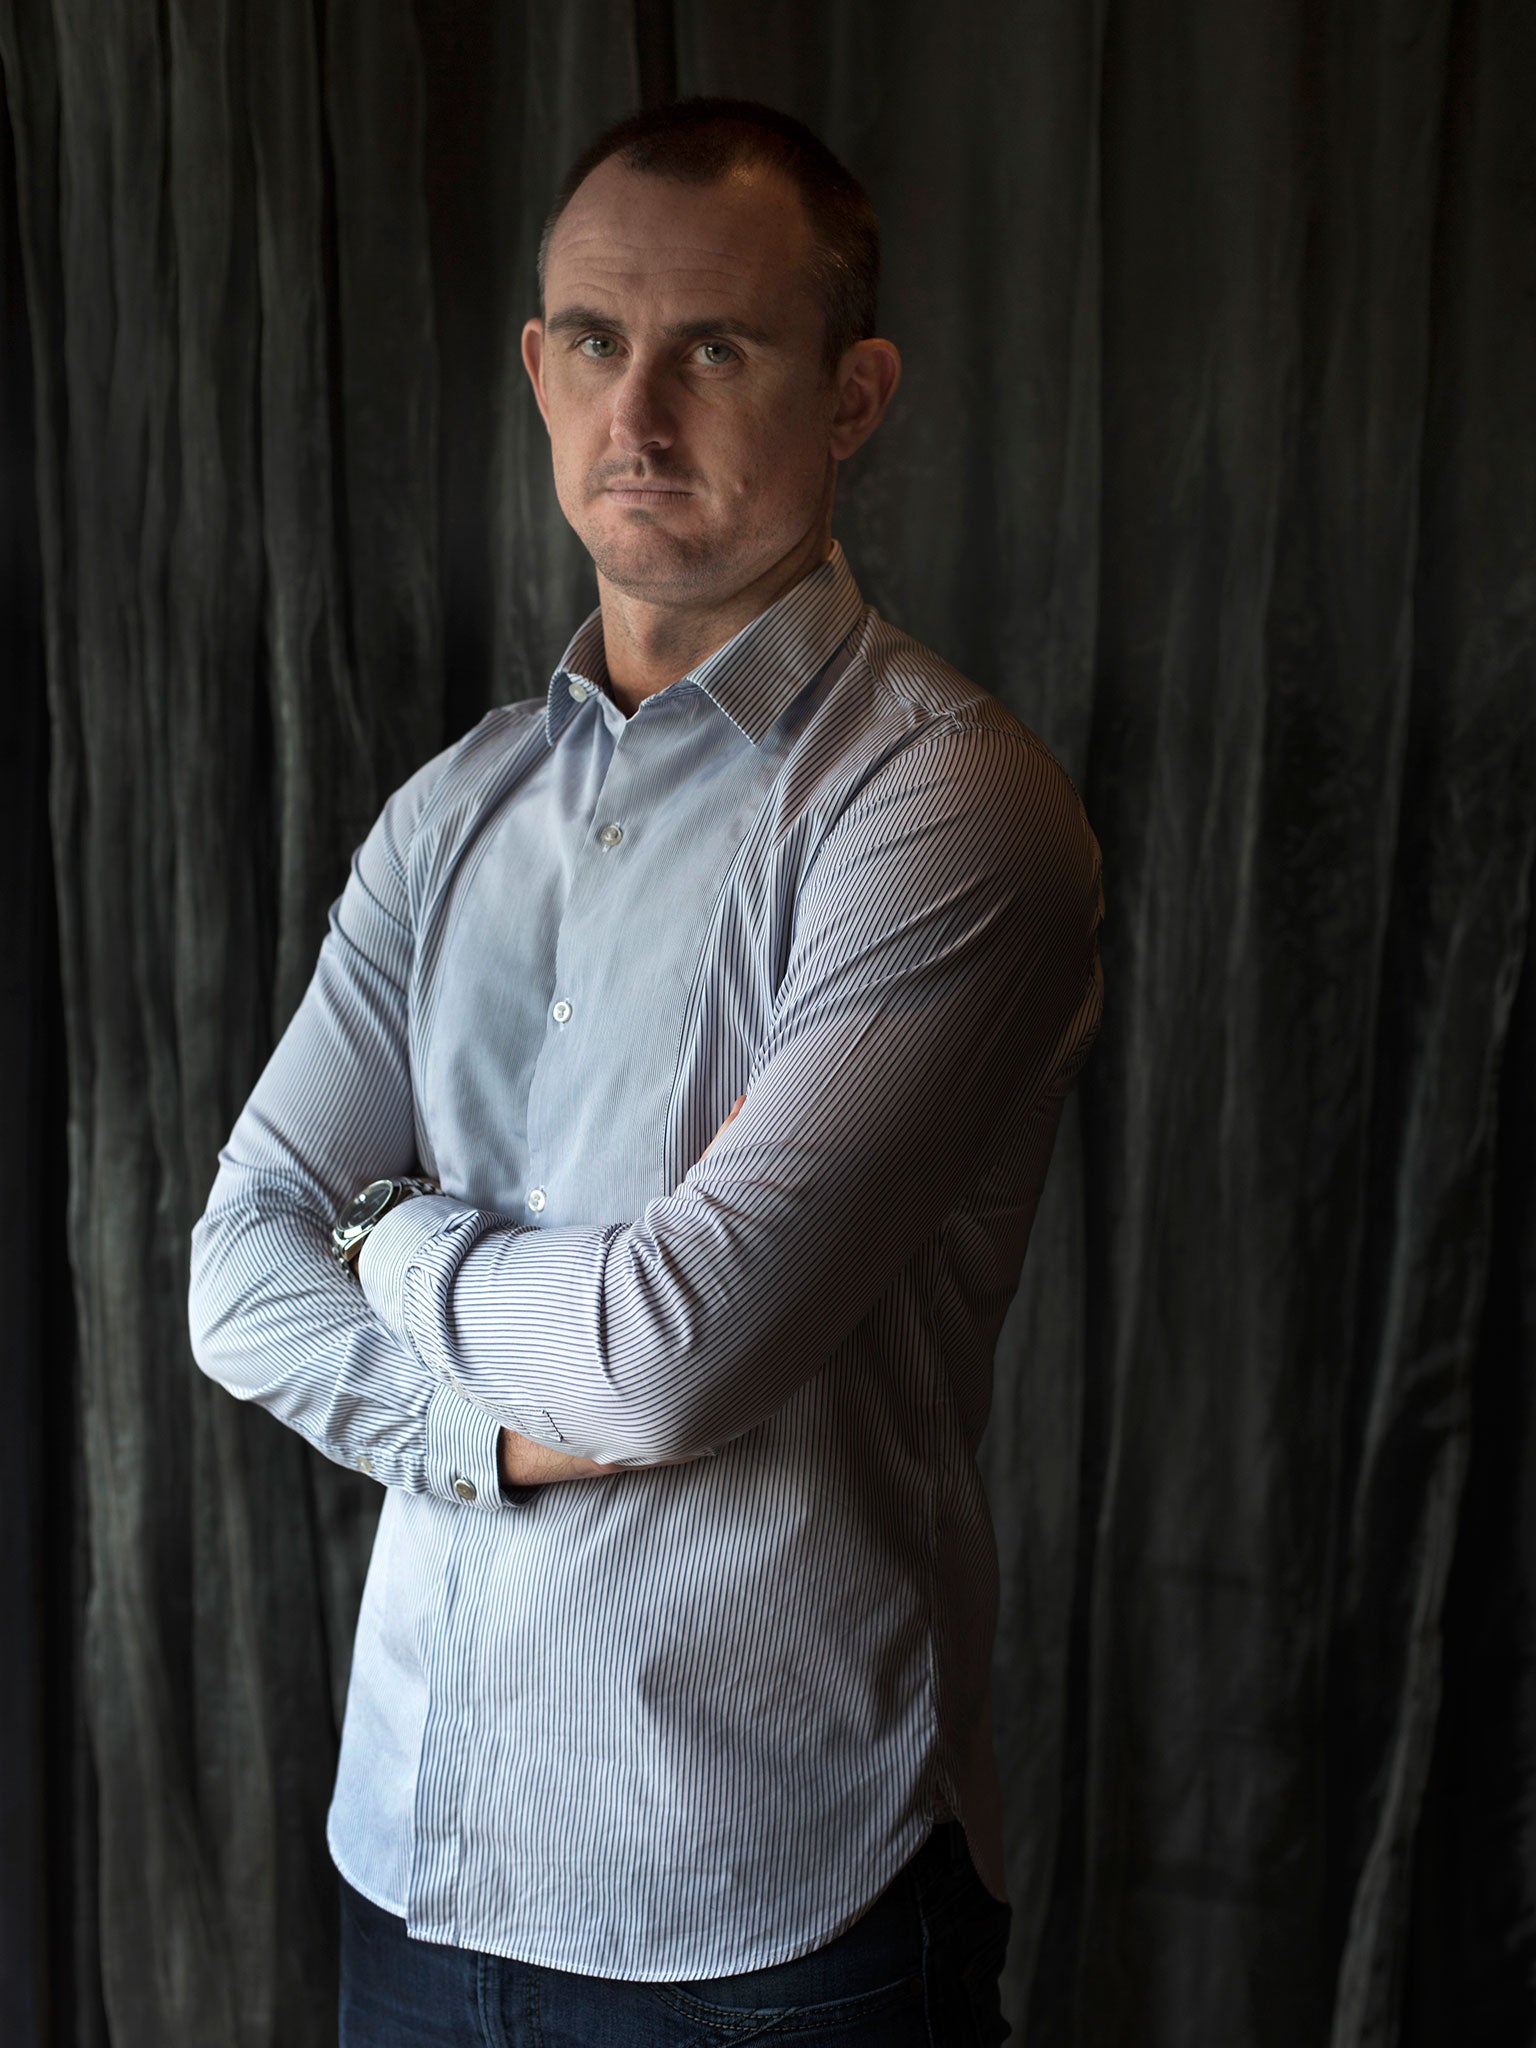 Francis Jeffers is now coaching at Everton’s academy